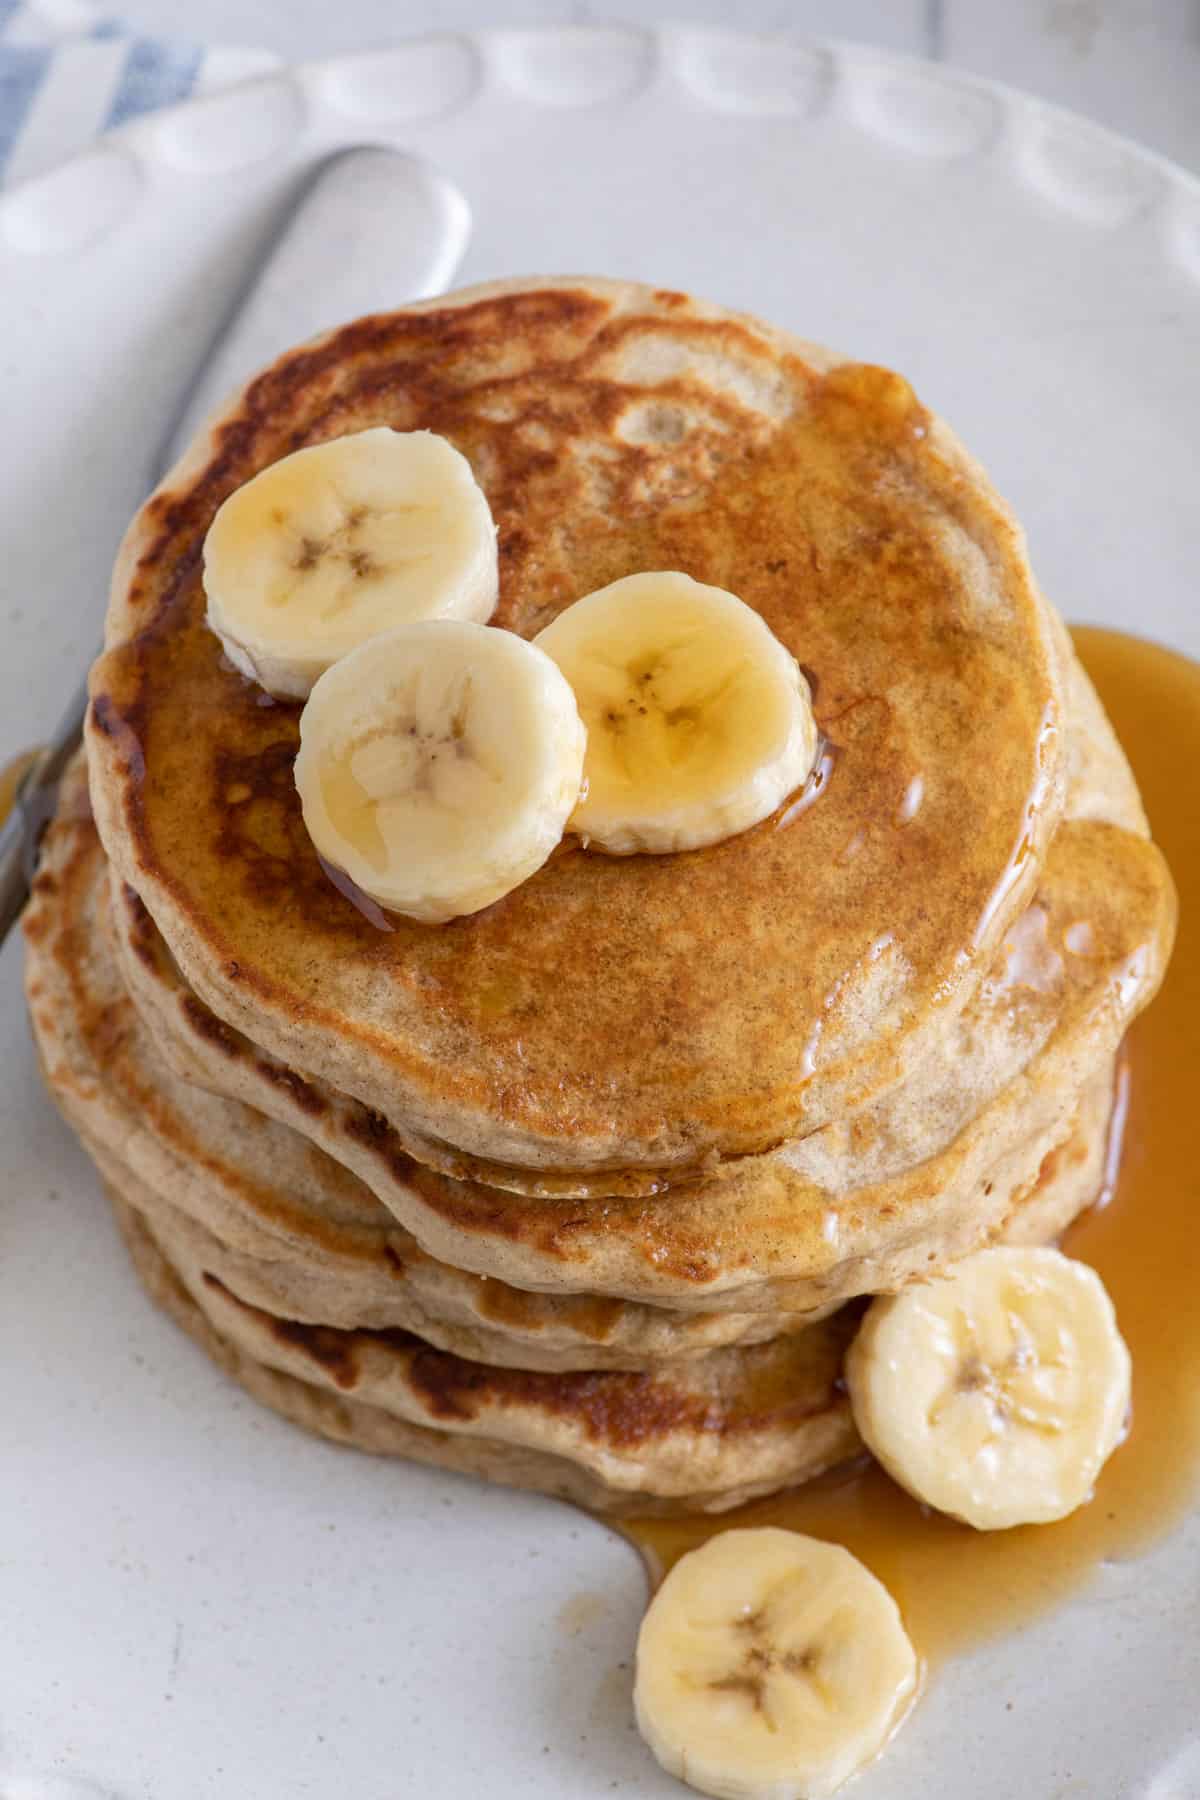 Overhead shot of a stack of banana pancakes with maple syrup and sliced bananas.